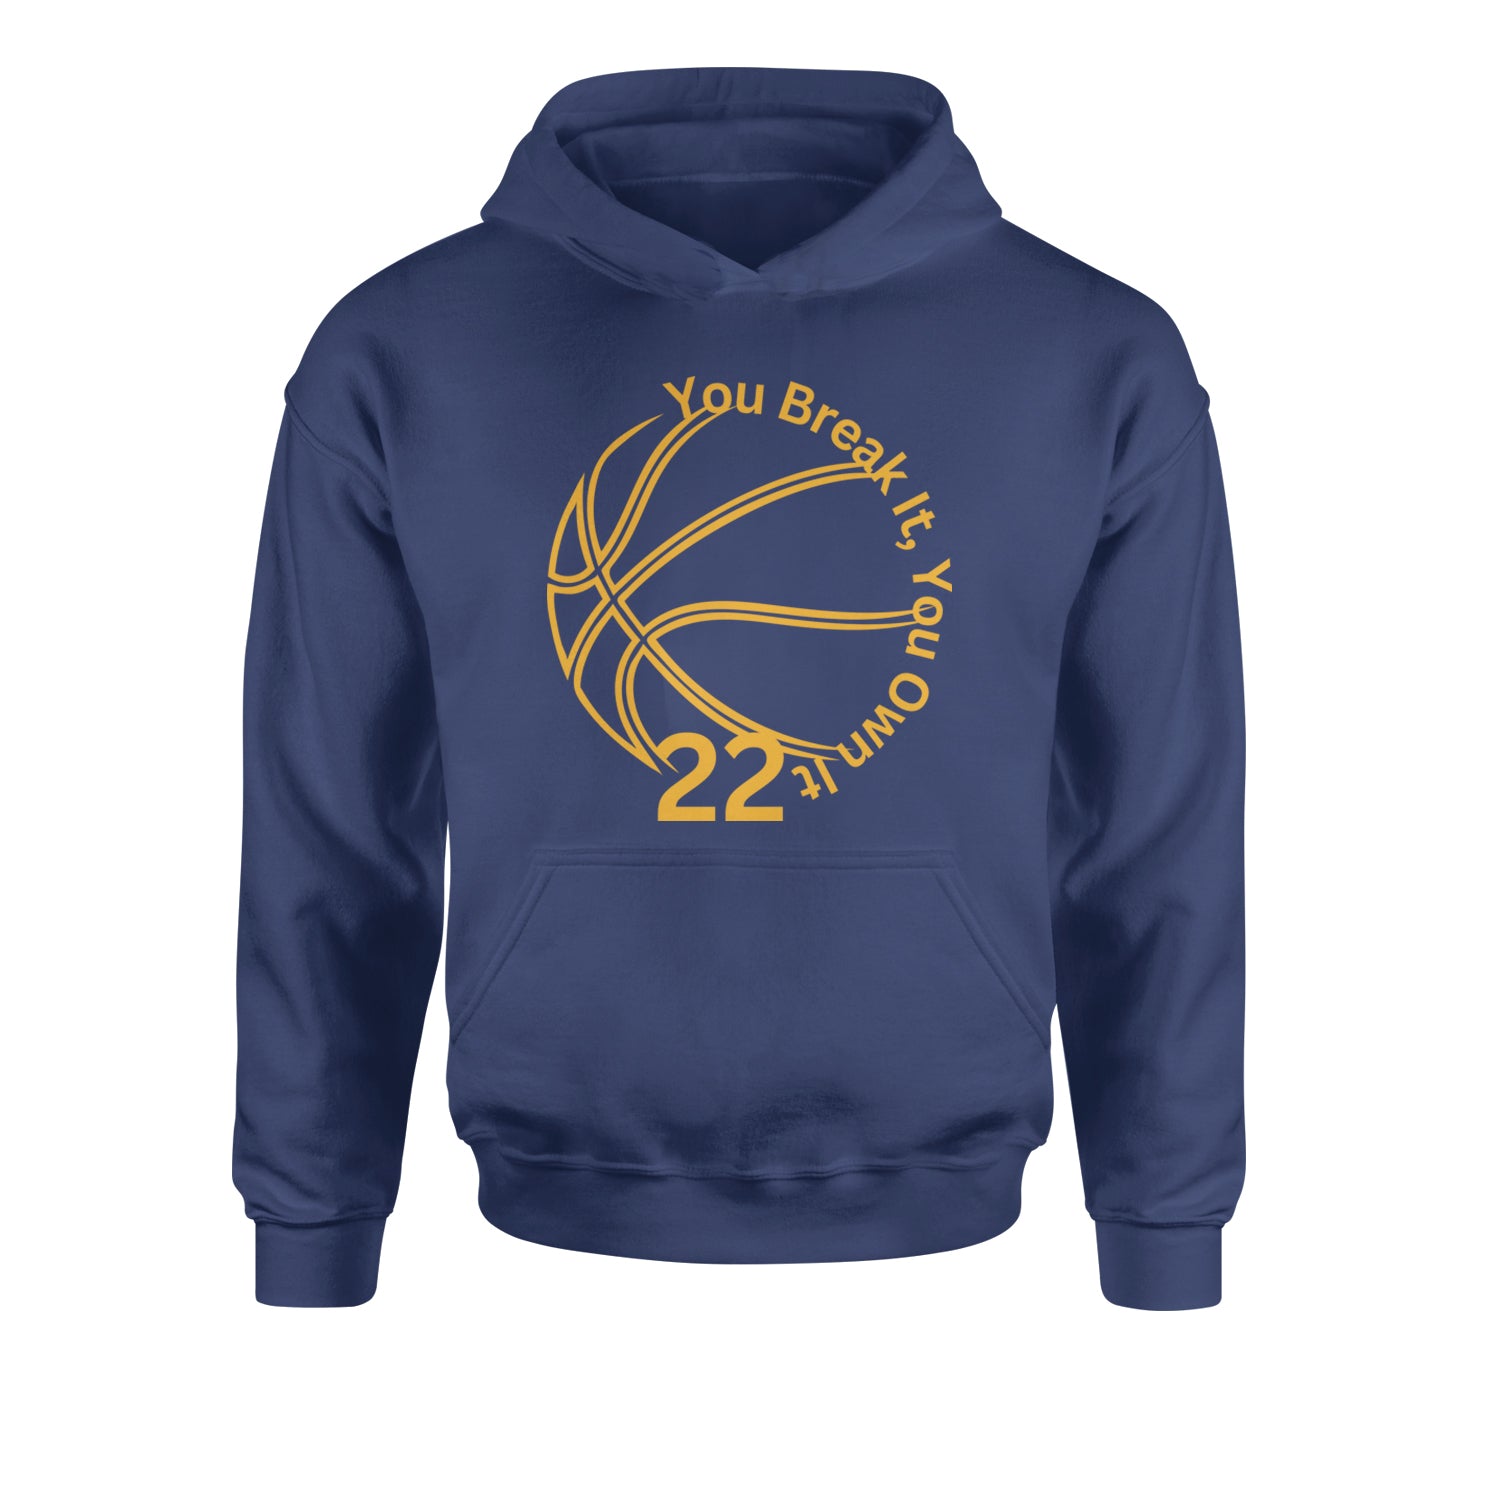 You Break It You Own It 22 Basketball Youth-Sized Hoodie